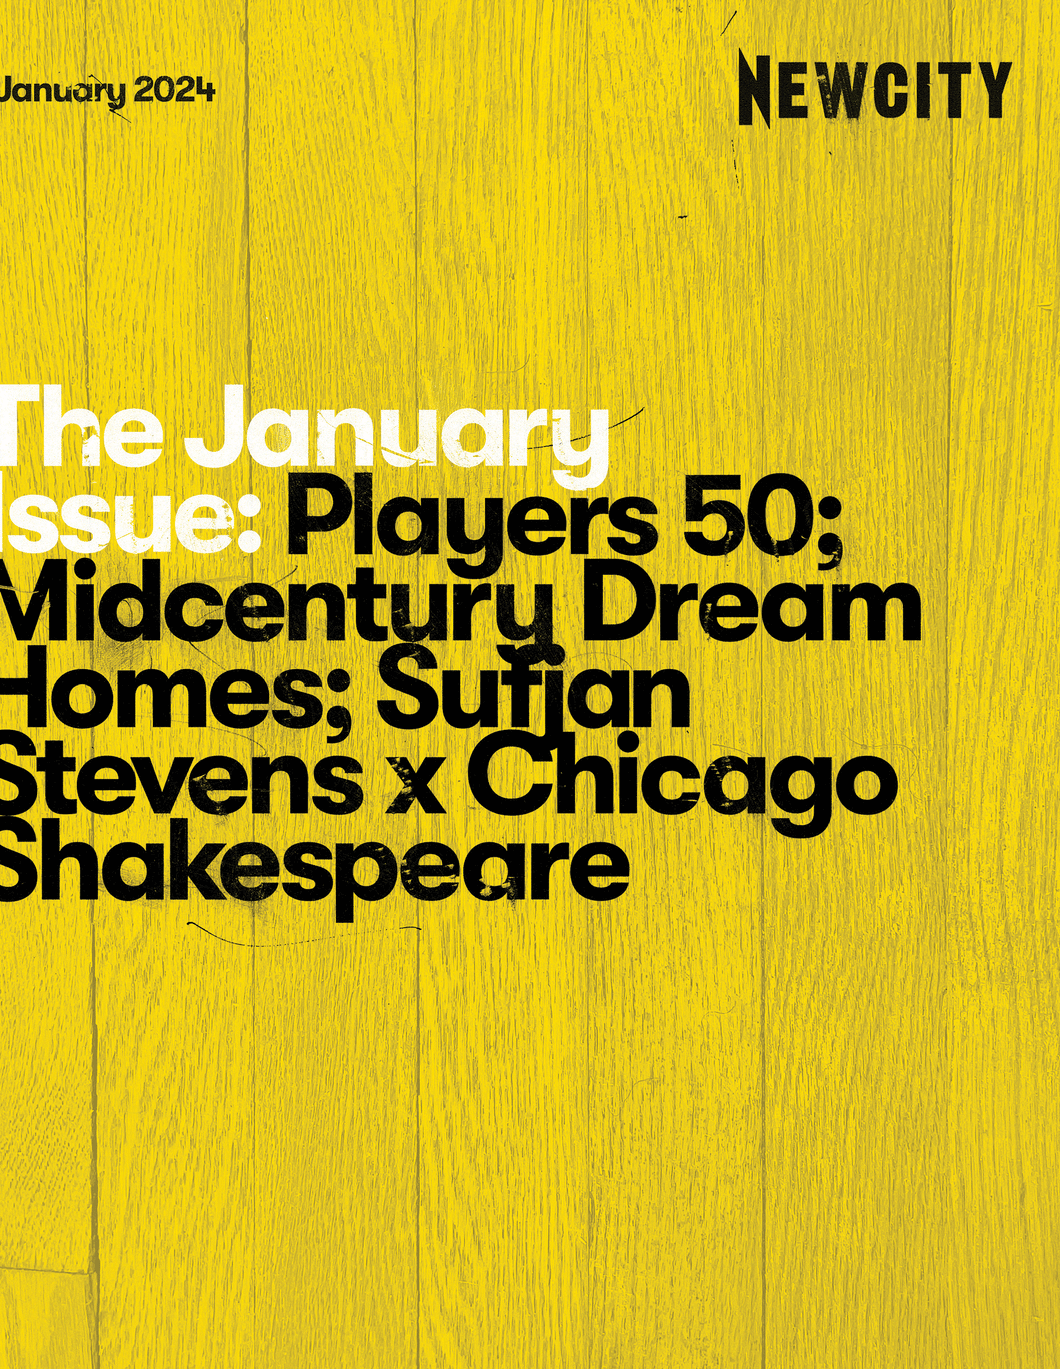 January 2024 Issue: Players 50 (Digital Edition)